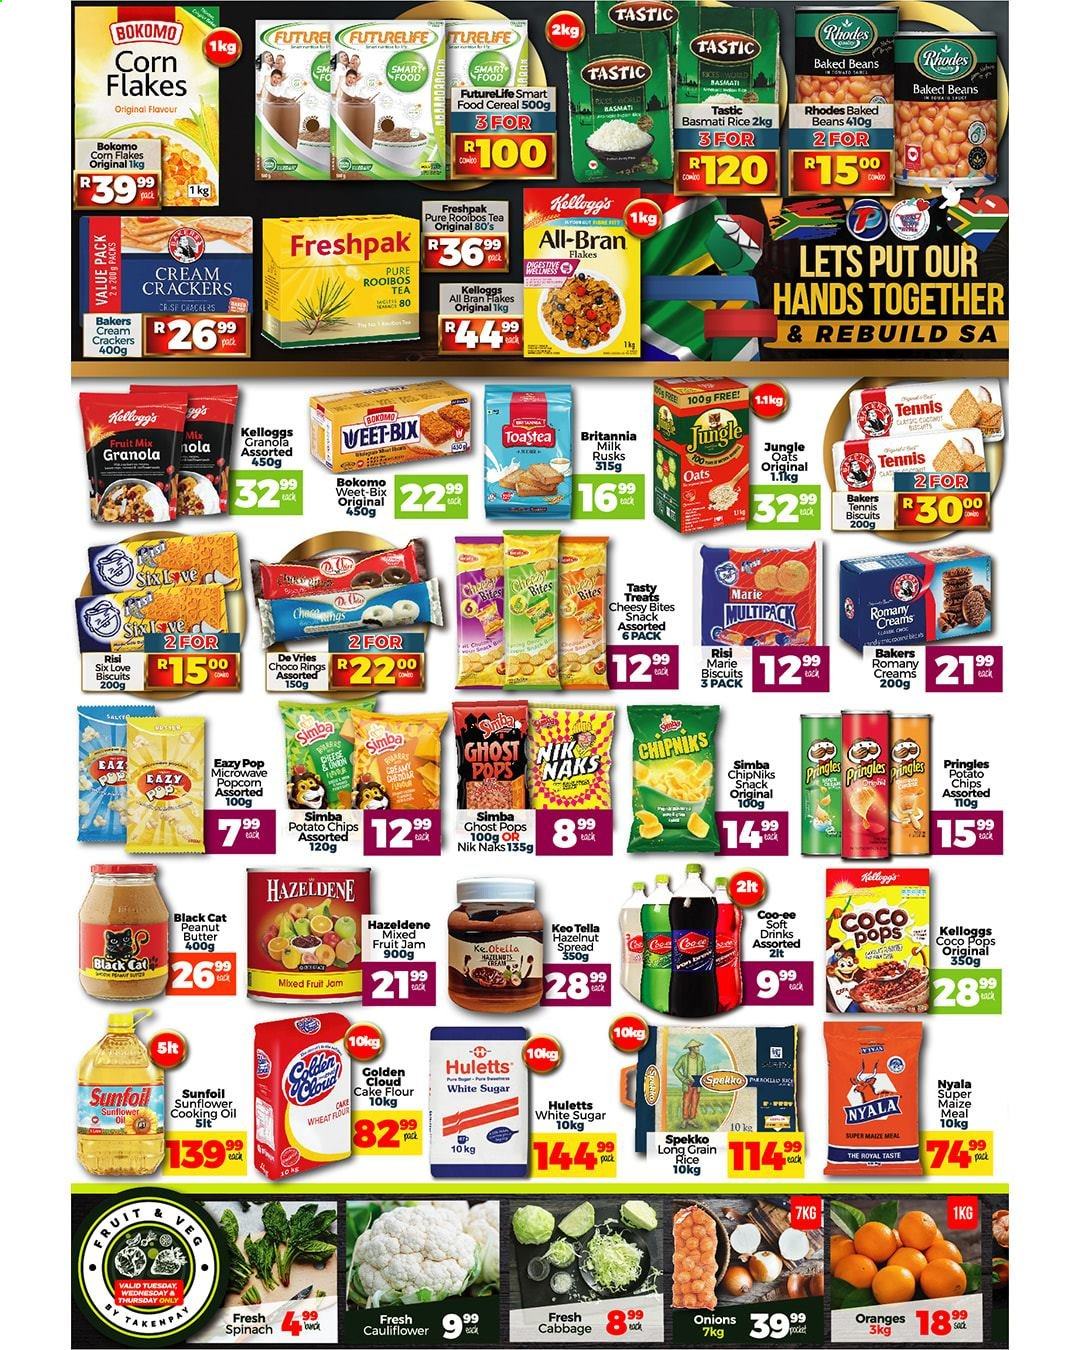 Take n Pay specials - 07.27.2021 - 08.01.2021. 